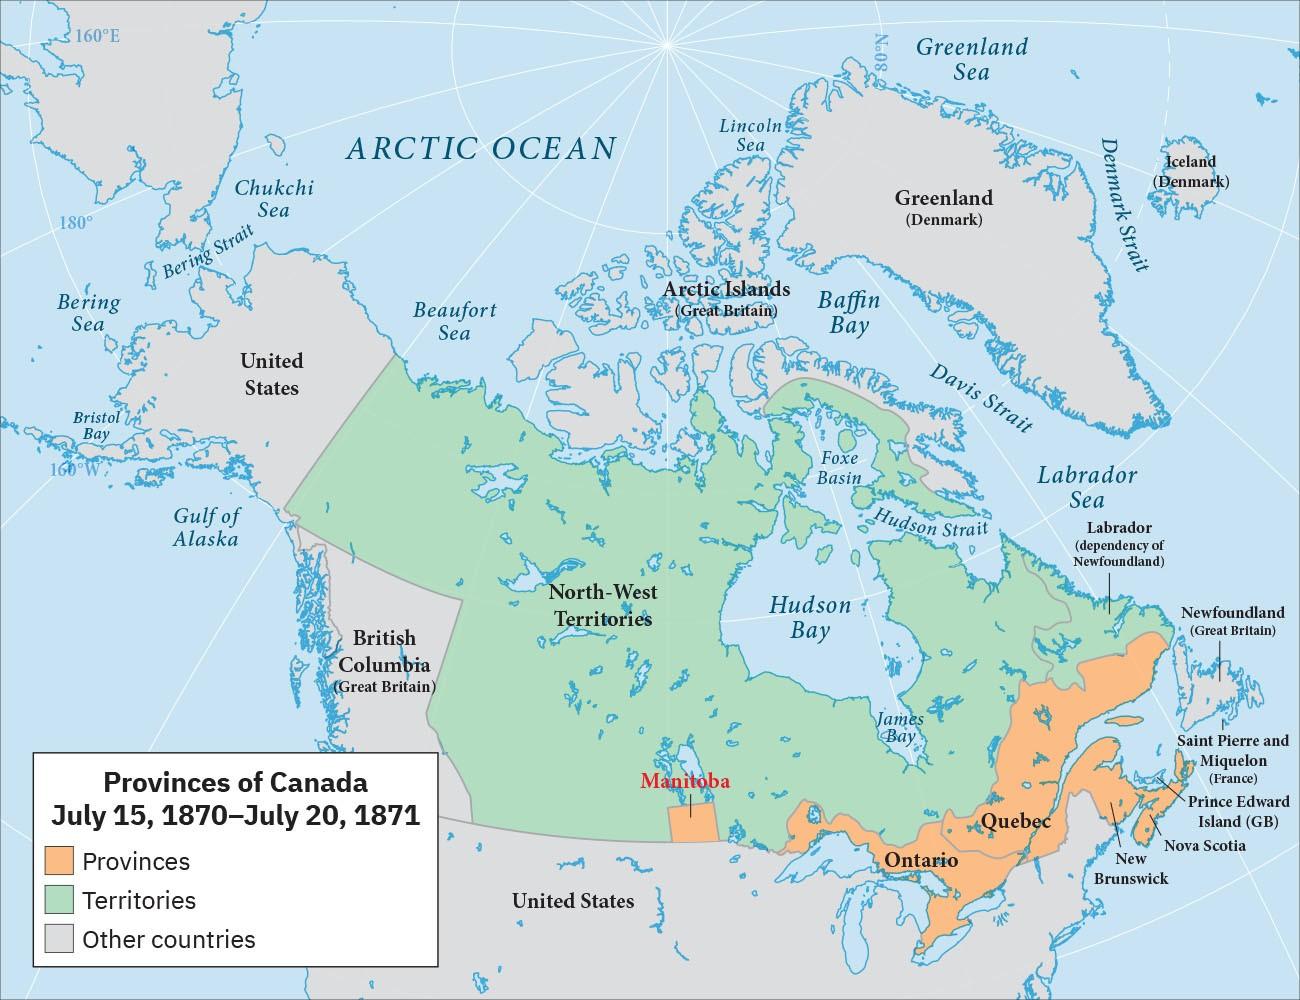 A map of the Arctic Ocean, Canada, Greenland, and the top portion of the United States is shown. A legend is labeled “Provinces of Canada; July 15, 1870–July 20, 1871.” On the legend, the color orange indicates “Provinces,” green indicates “Territories,” and gray indicates “Other countries.” Most of Canada (except for a rectangular portion in the southwest labelled “British Columbia” (Great Britain)), is highlighted green and labeled “North-West Territories.” A square section at the bottom middle of Canada labeled “Manitoba” is highlighted orange as well as a long section along the bottom of Canada on the southeastern edge, including places labeled “Ontario, Quebec, New Brunswick, Nova Scotia, Prince Edward Island (GB), and Saint Pierre and Miquelon (France).” All the other lands shown are highlighted gray.